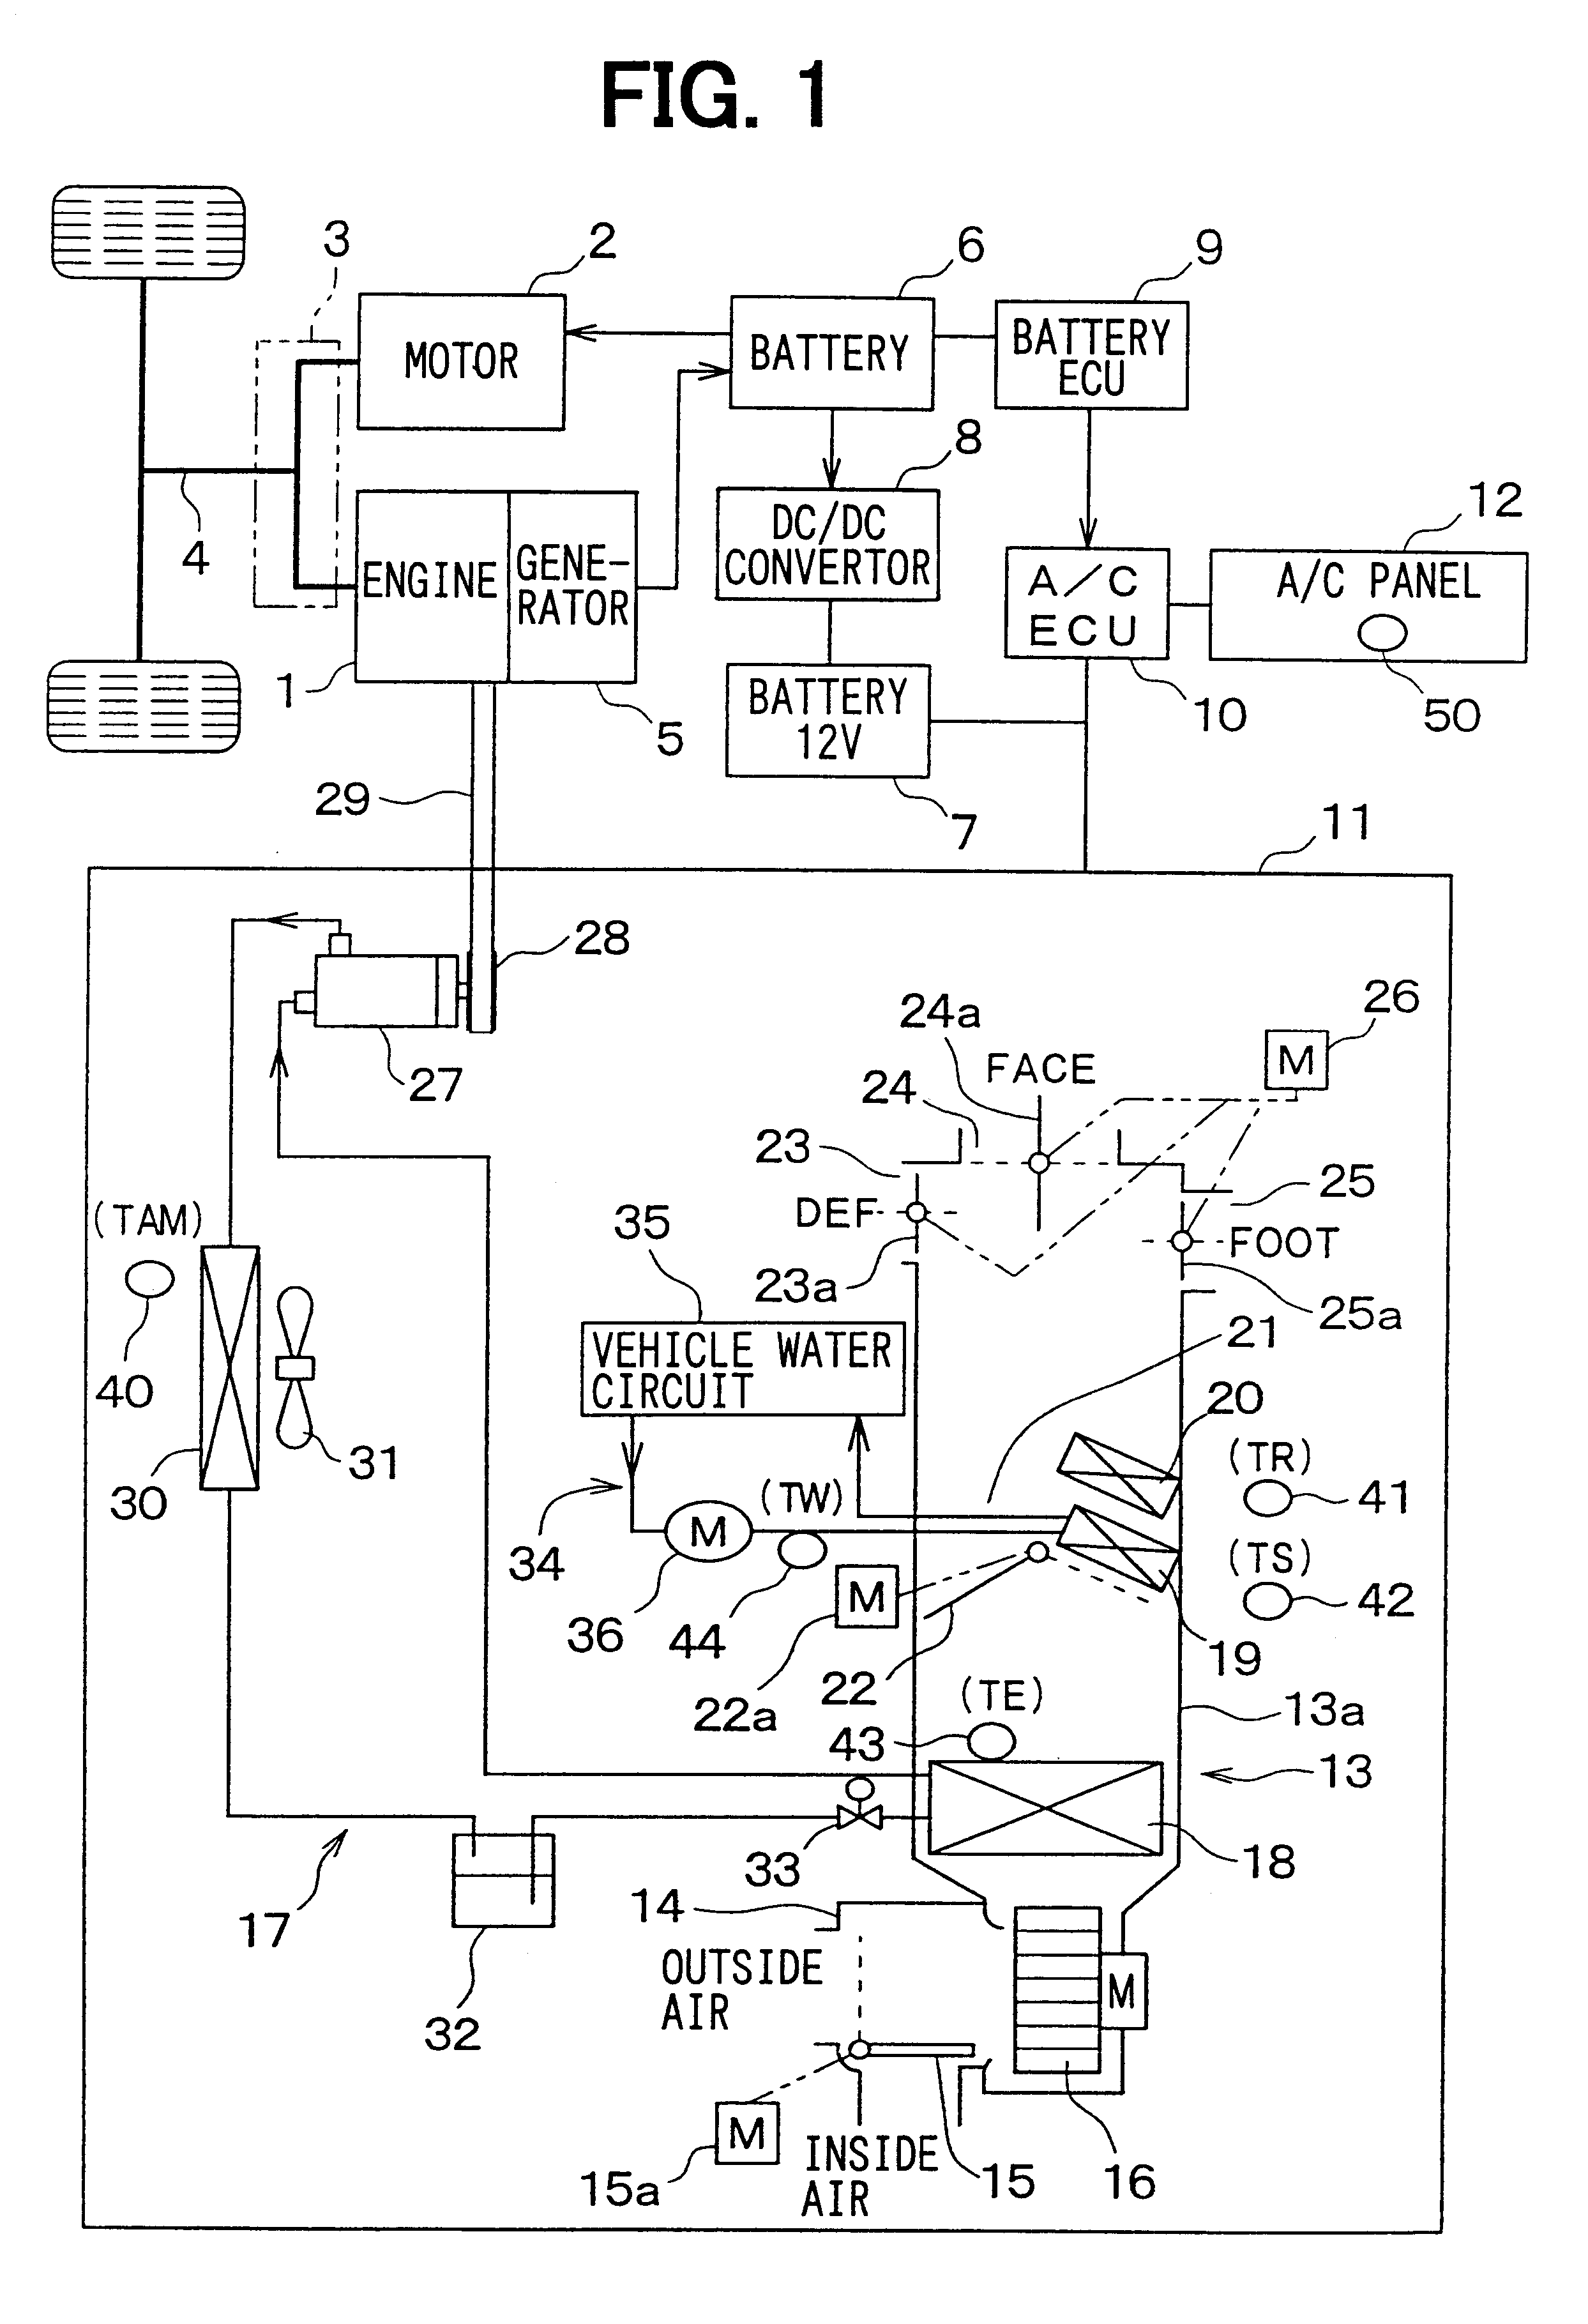 Charging control system for air conditioner and battery